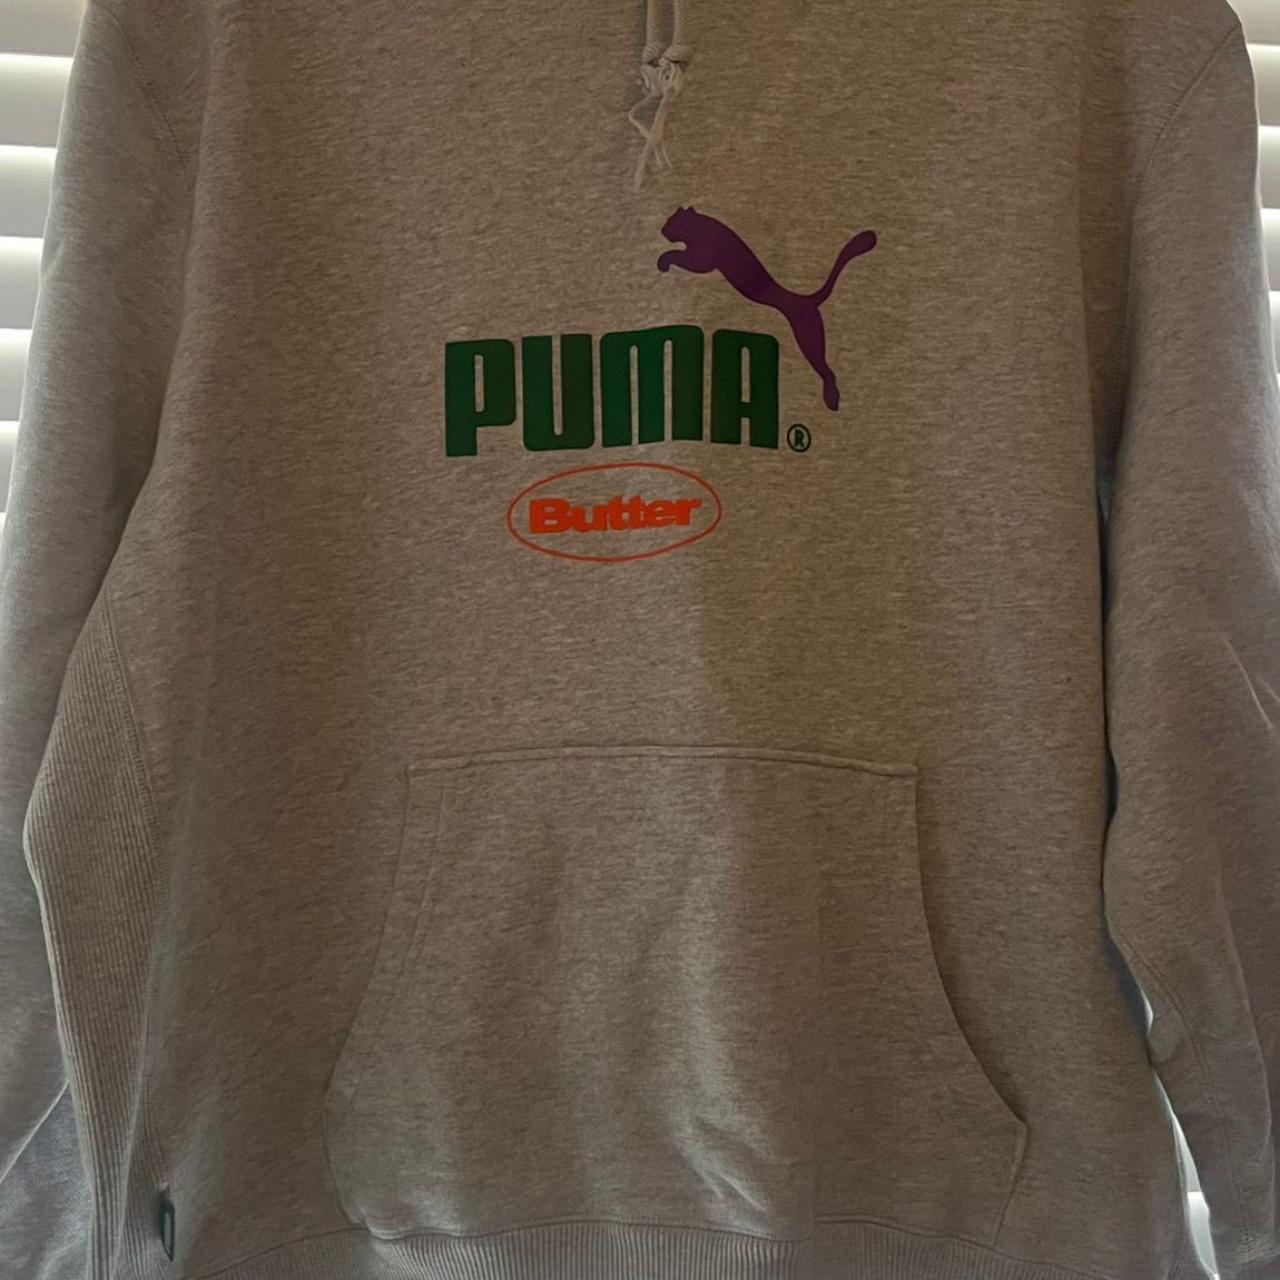 Puma x Butter Goods collab hoodie Nice weight and... - Depop